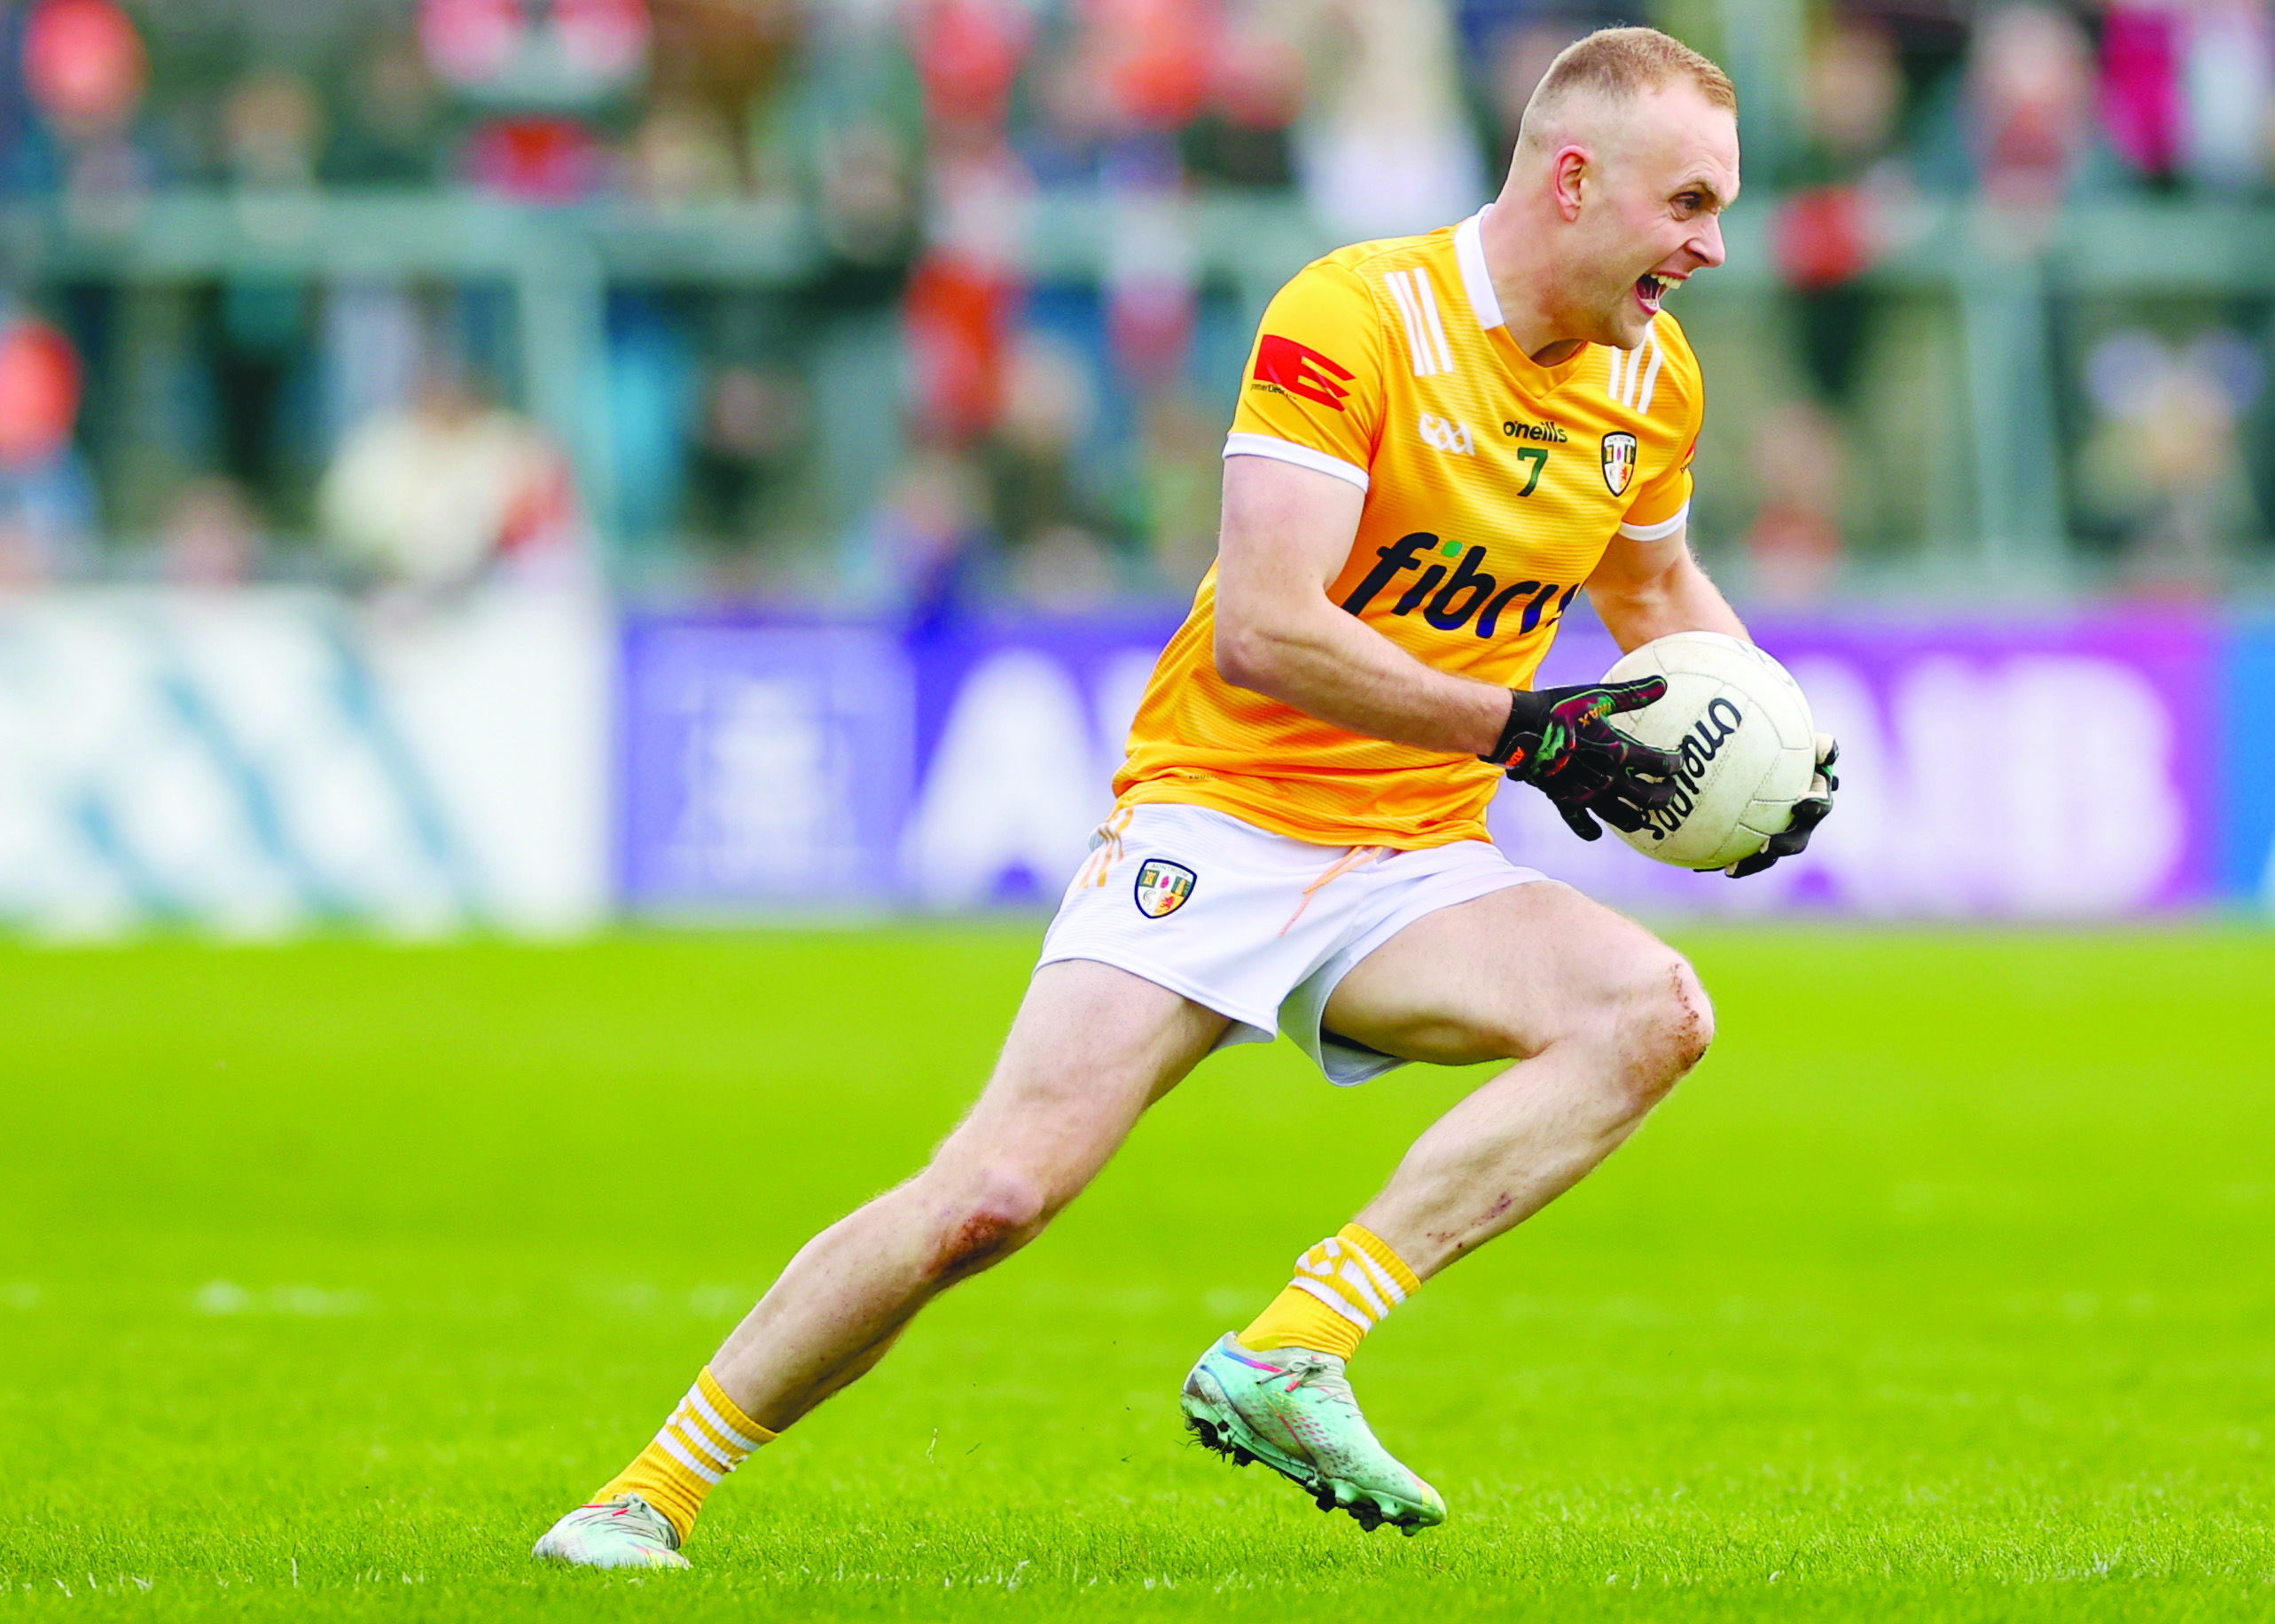 Marc Jordan insists a good start will be vital against Offaly on Sunday